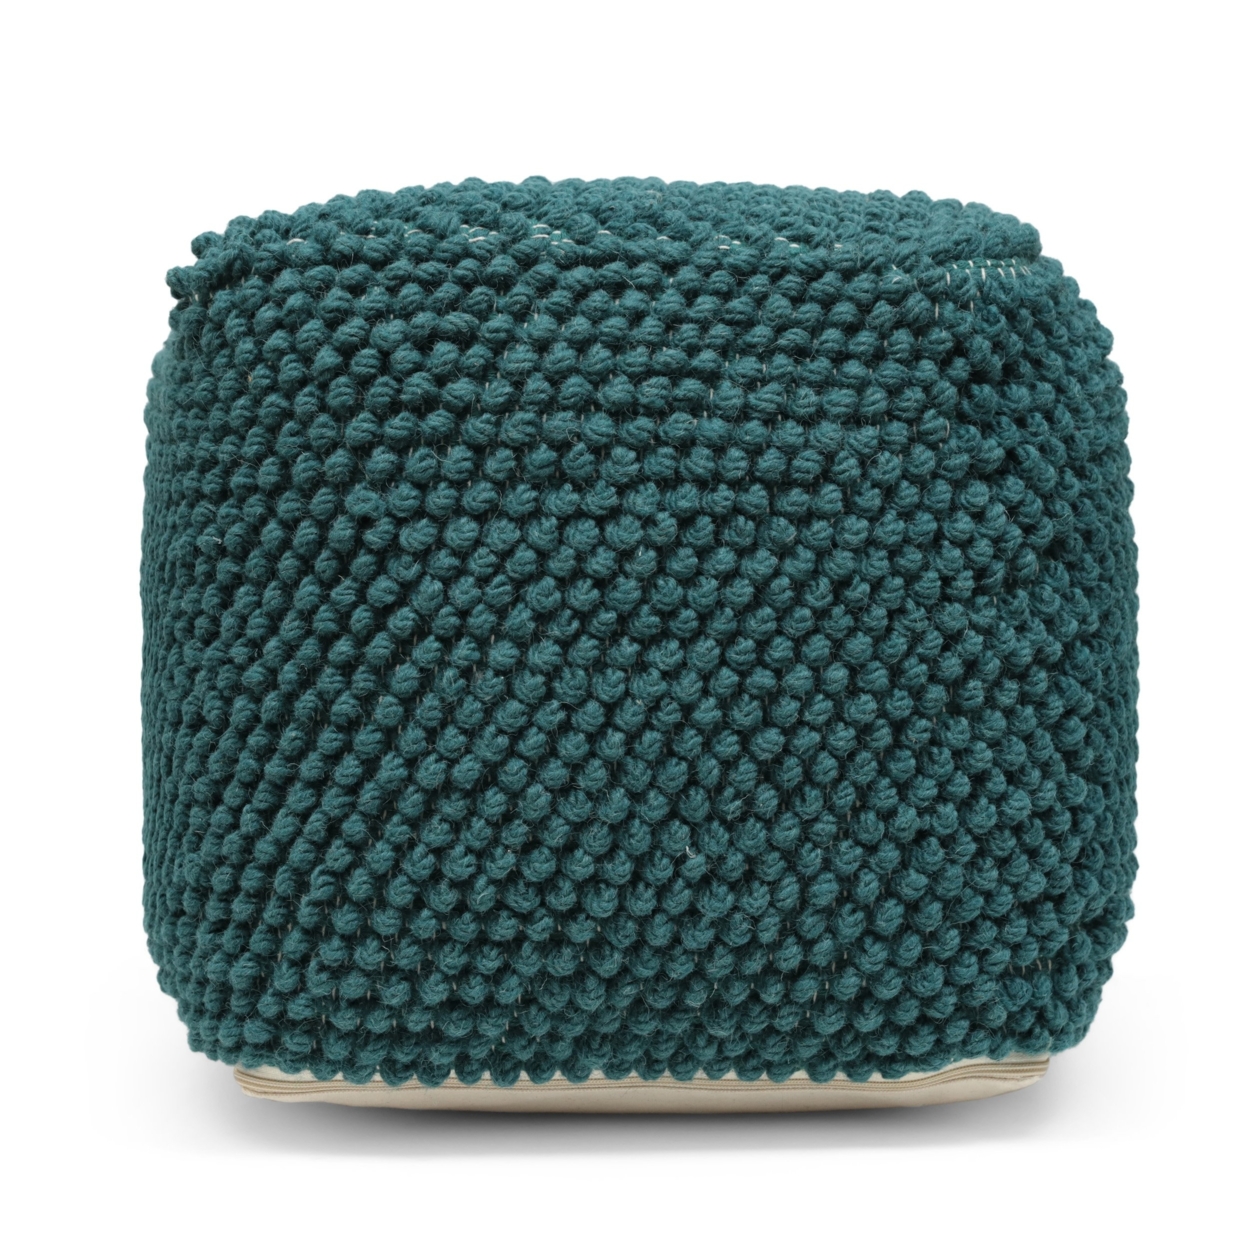 Devries Boho Handcrafted Tufted Fabric Cube Pouf - Teal